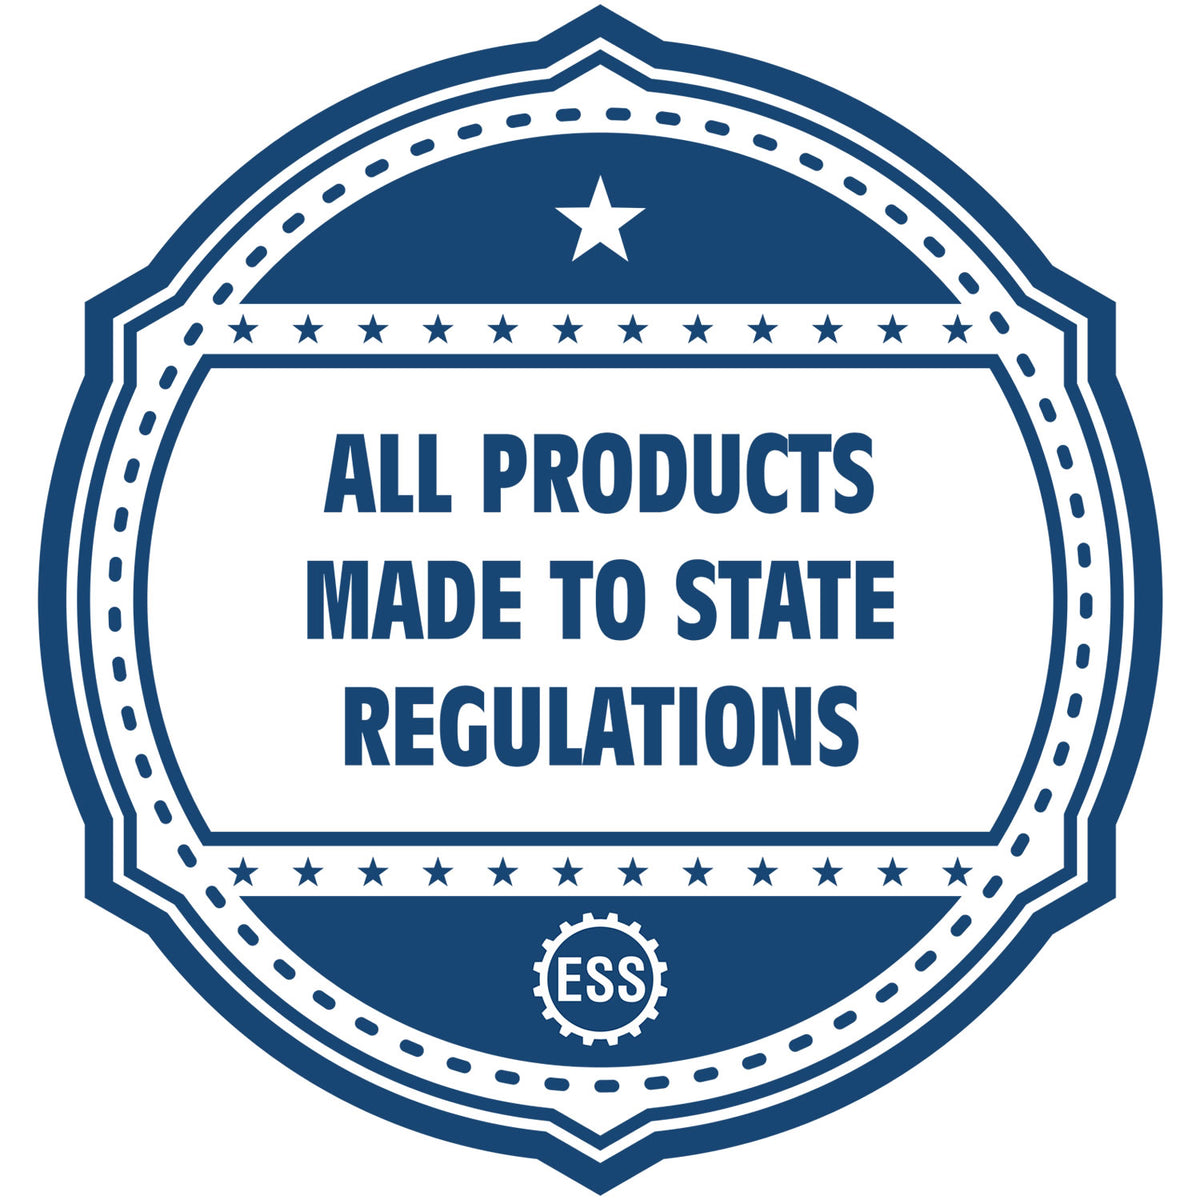 An icon or badge element for the Soft Pocket Mississippi Landscape Architect Embosser showing that this product is made in compliance with state regulations.